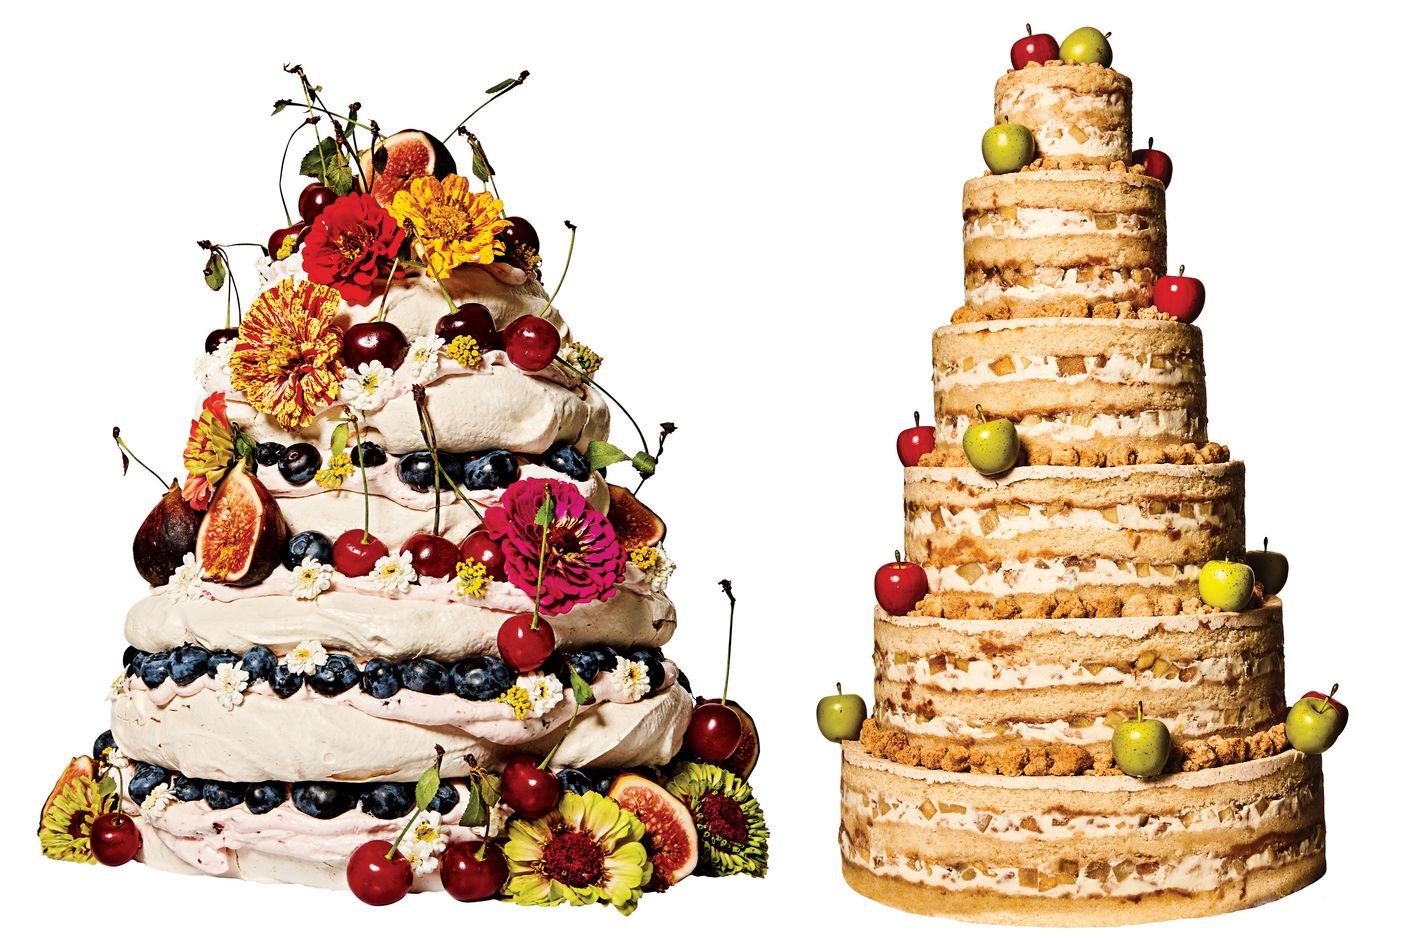 10 Wedding Cake Alternatives That Are Huge Crowd-Pleasers!